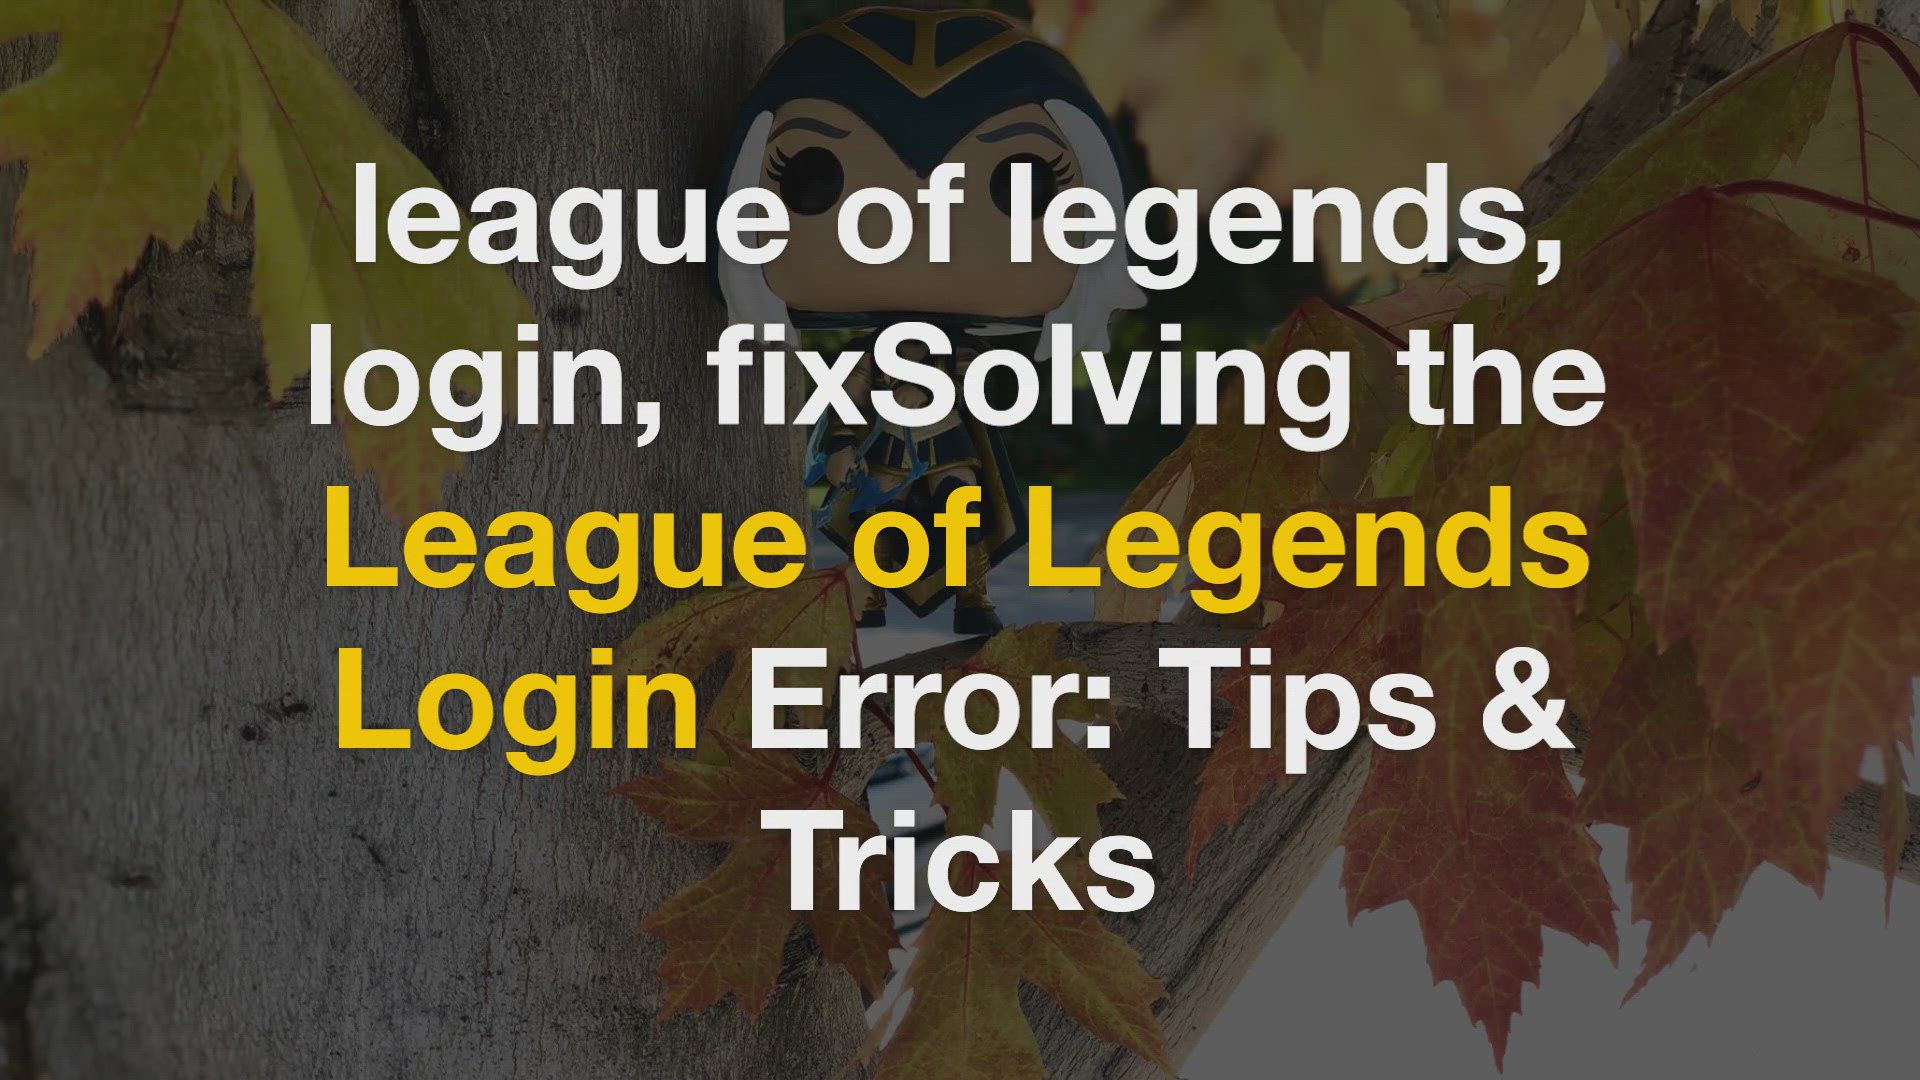 How to Fix Failed To Receive Platform SIPT on League Of Legends 